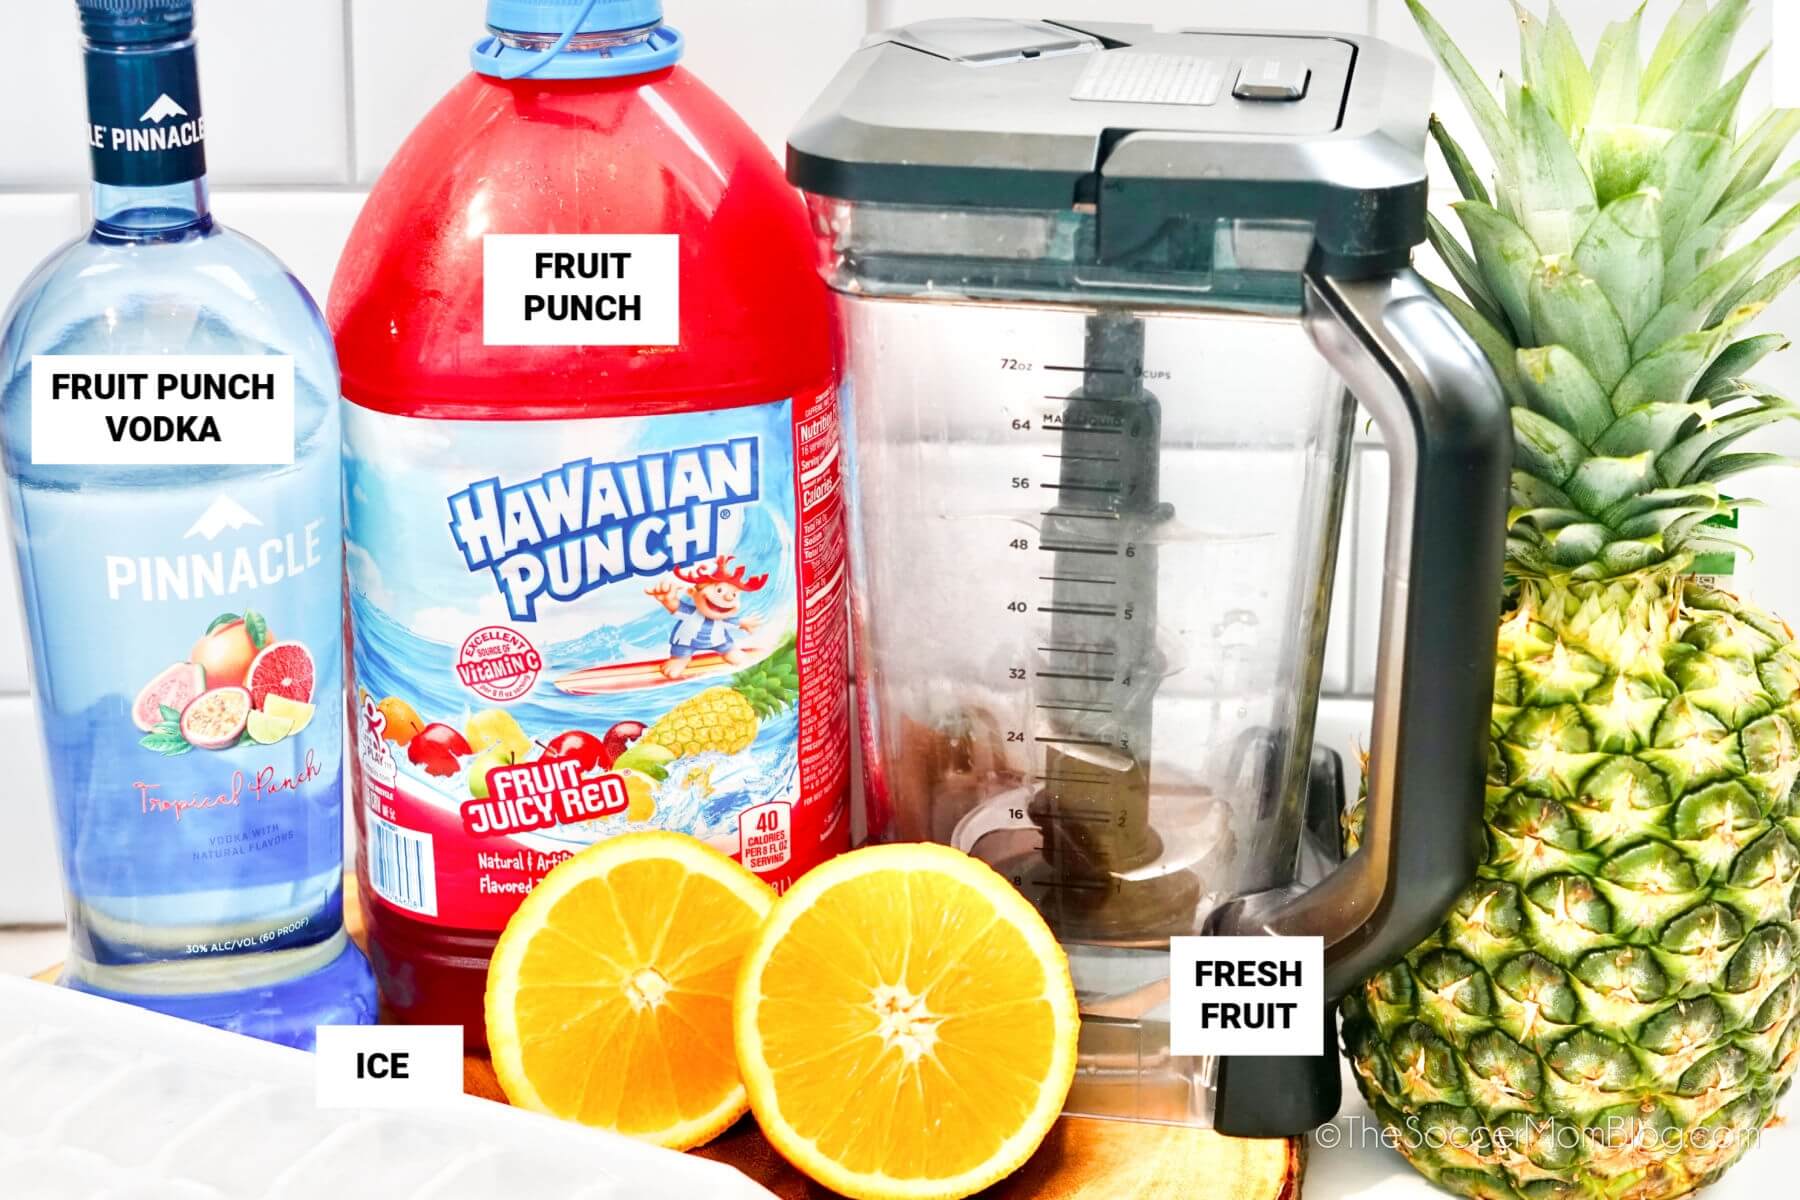 ingredients to make frozen Hawaiian punch, with labels: fruit punch vodka, fruit punch, ice, fresh fruit